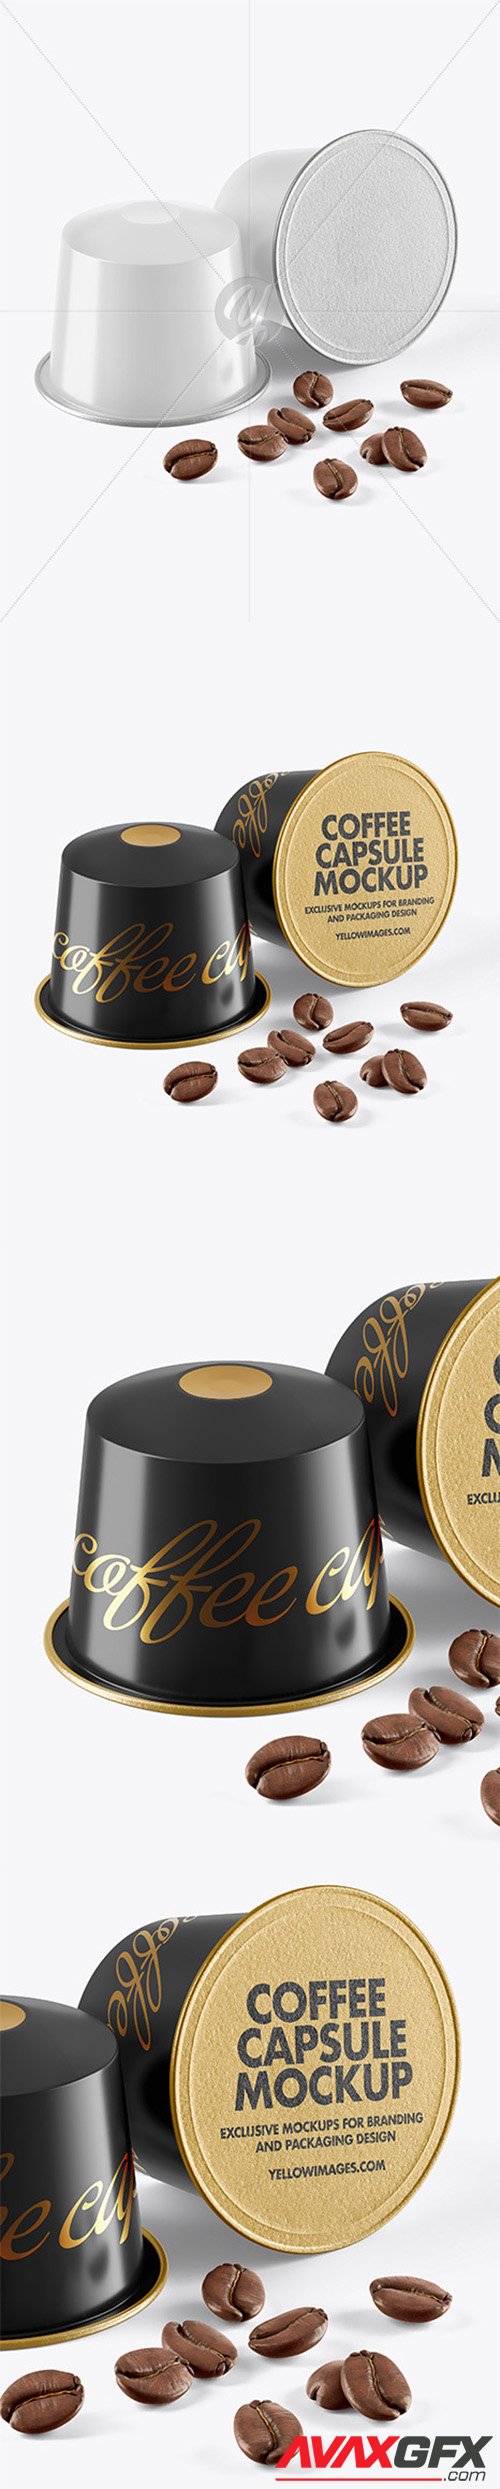 Download Coffee Capsules Paper Box Mockup 60796 Avaxgfx All Downloads That You Need In One Place Graphic From Nitroflare Rapidgator Yellowimages Mockups